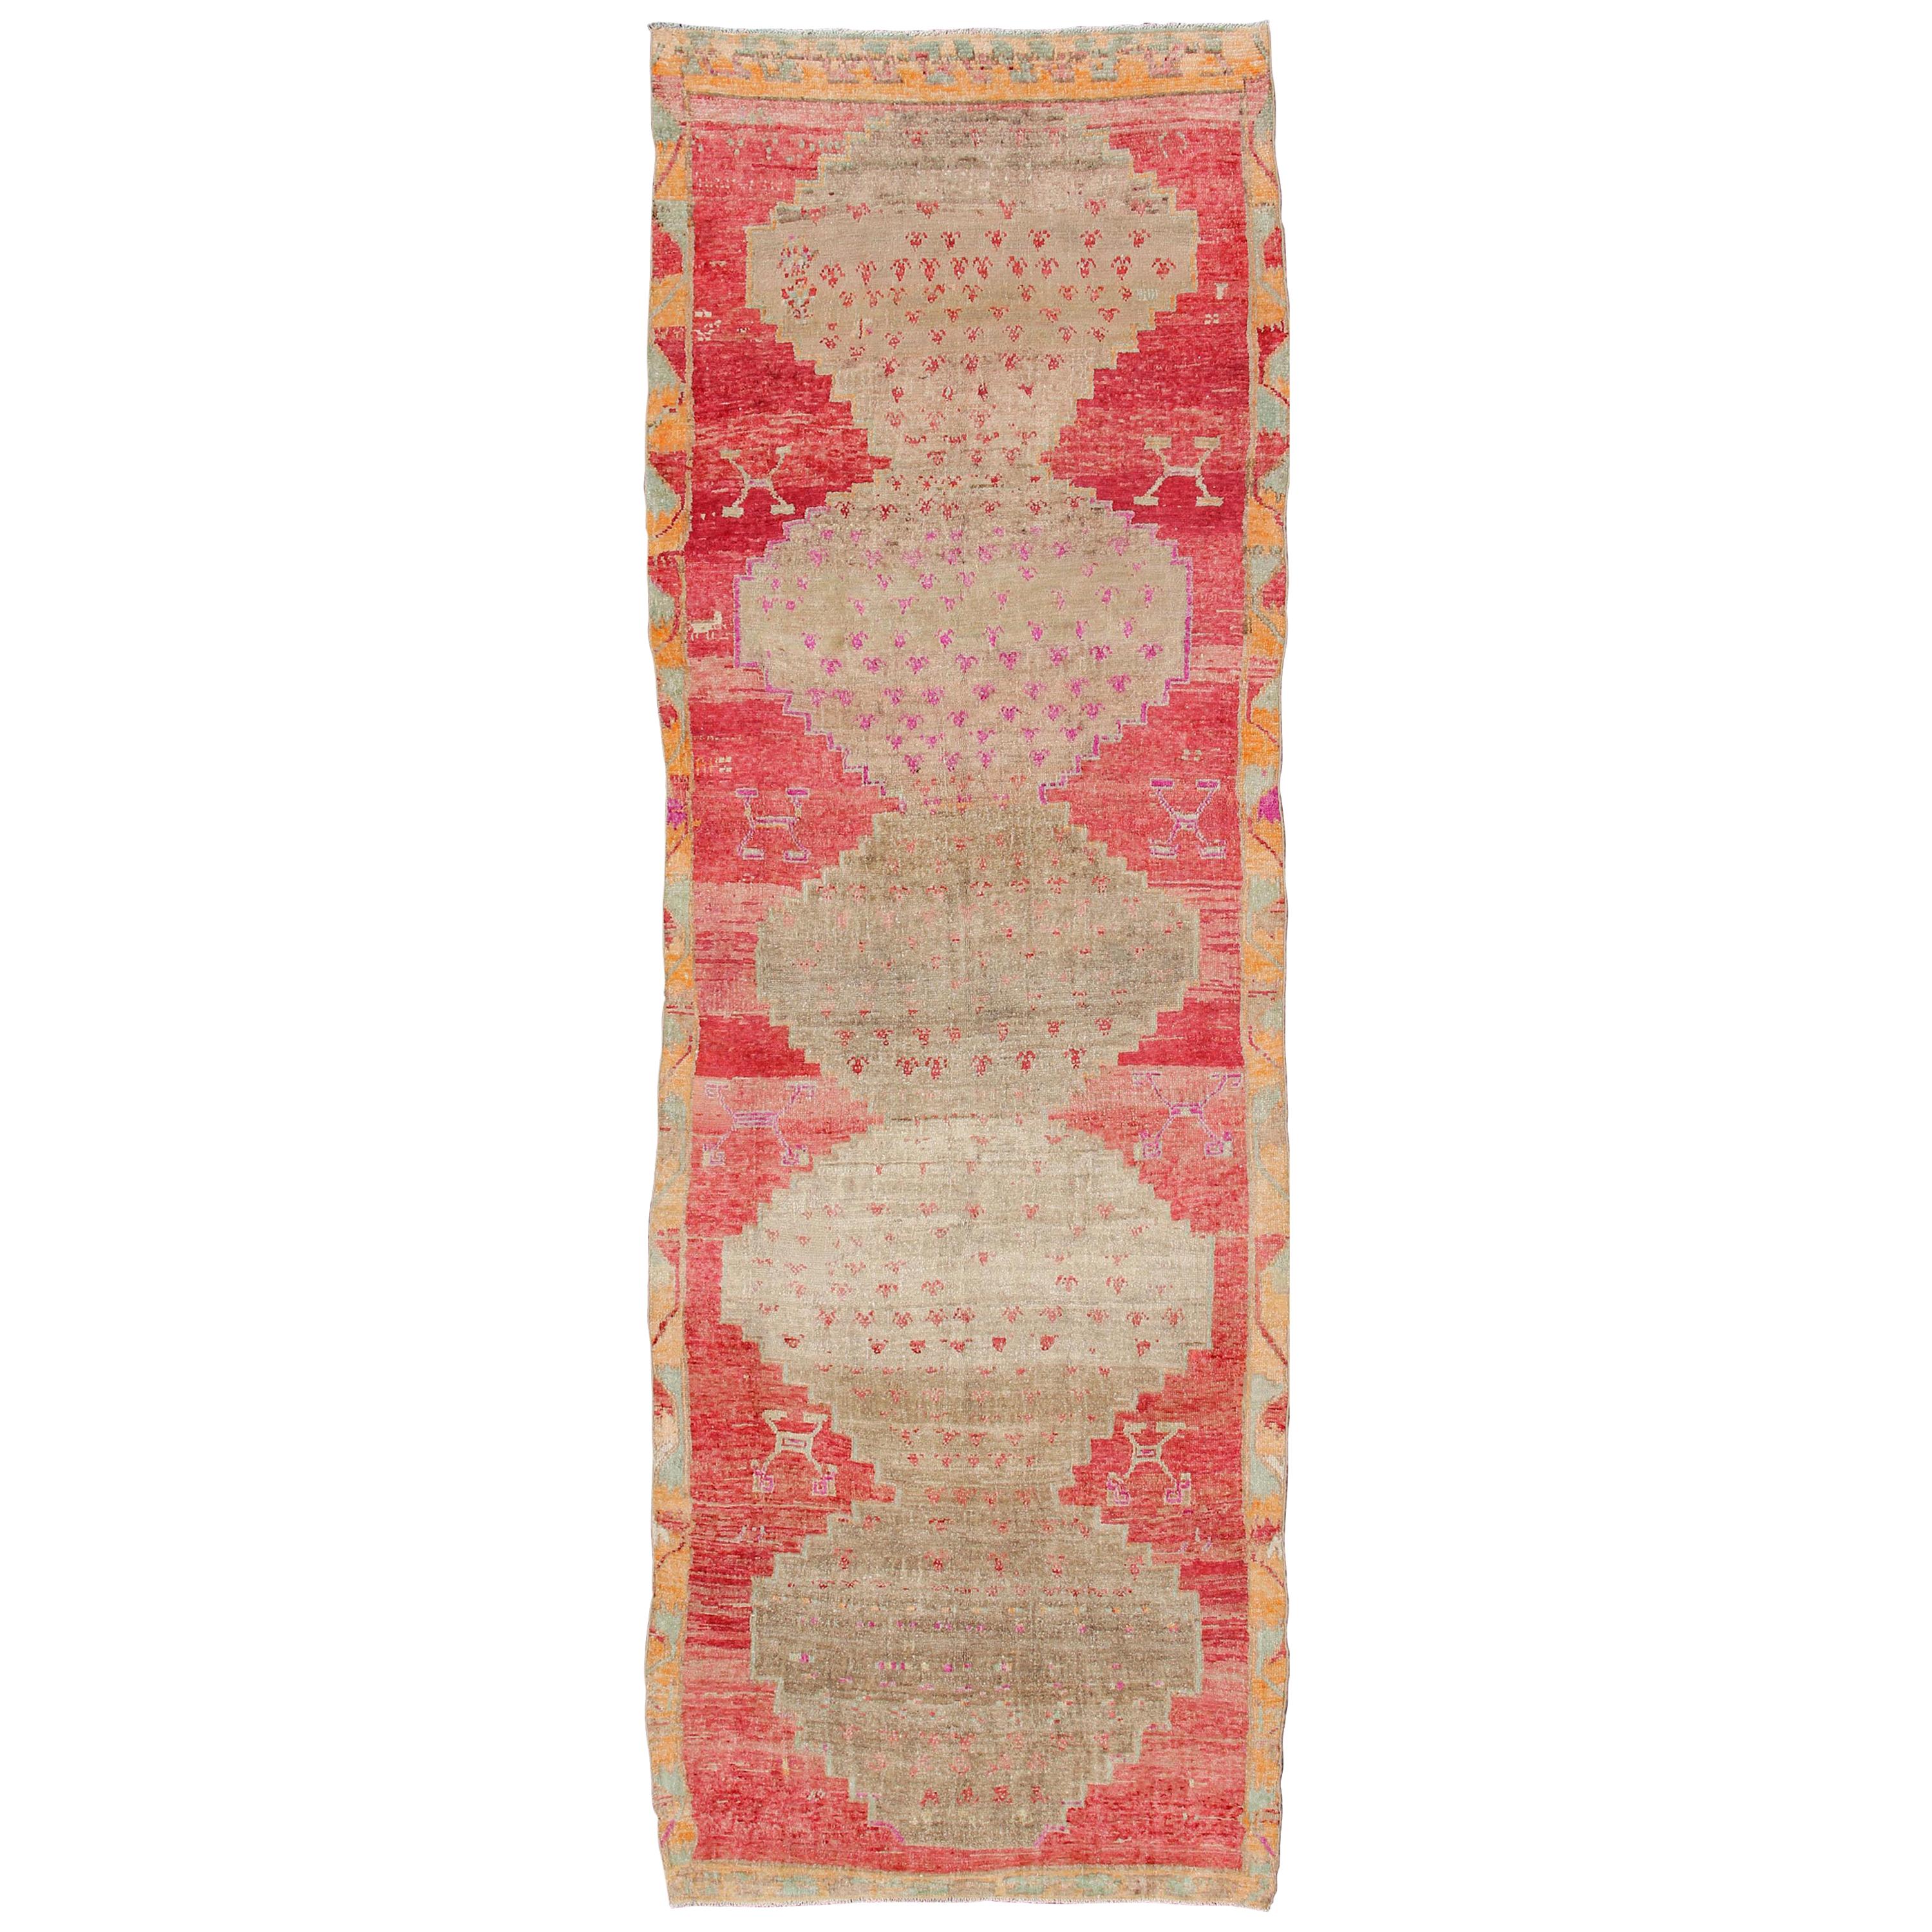 Vibrant Turkish Vintage Runner in Faded Red, Coral, Orange, Pink and Green